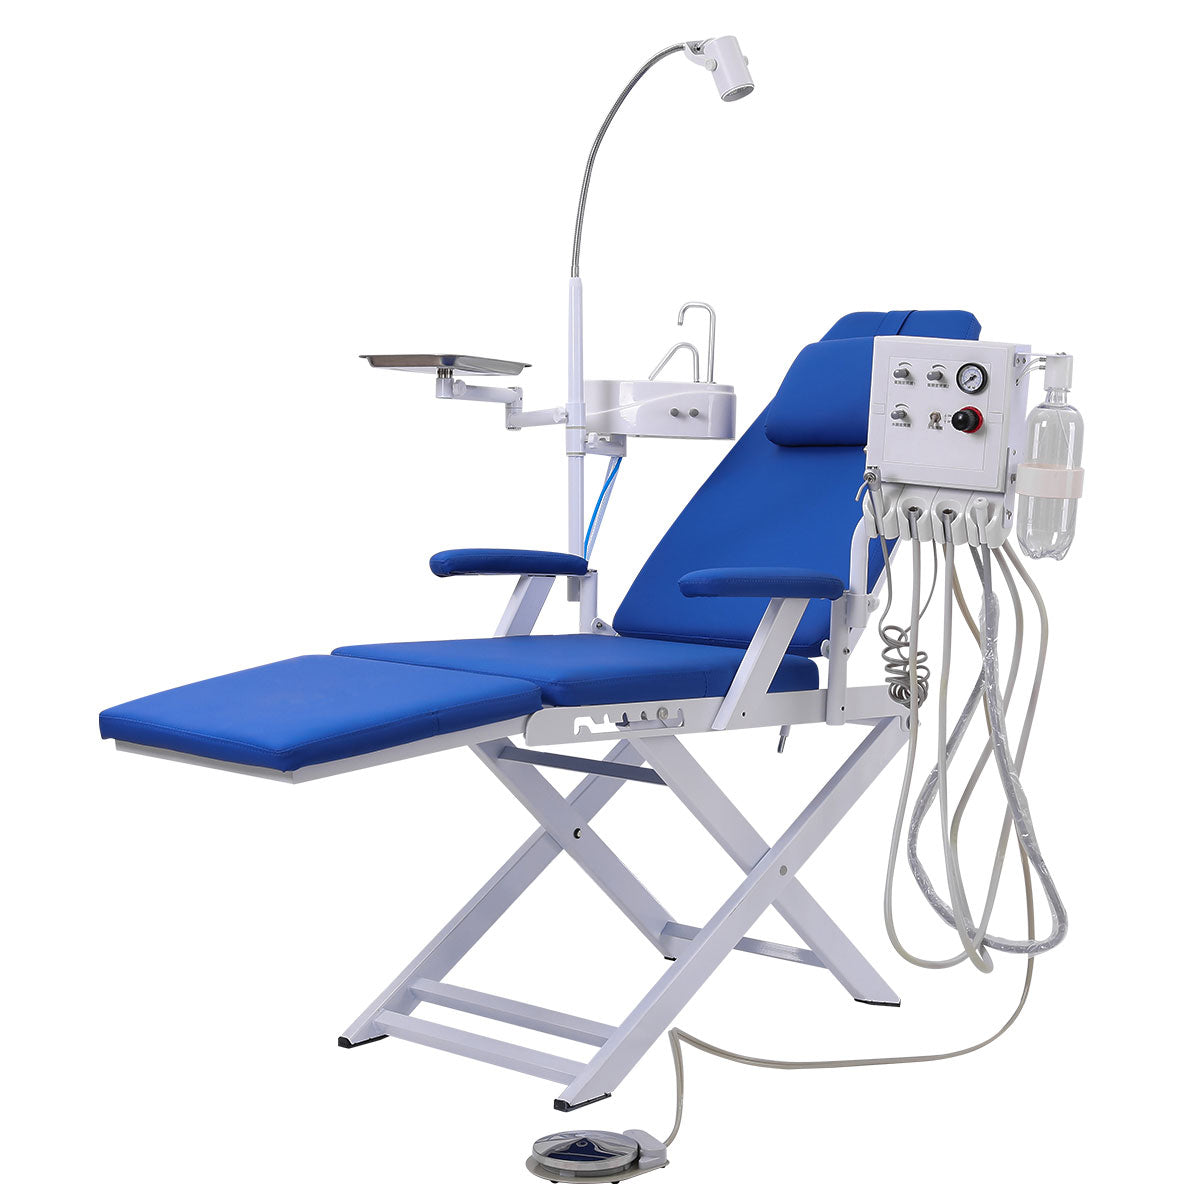 Dental Portable Mobile Folding Chair Rechargeable LED Light with Turbine Blue 4 Holes